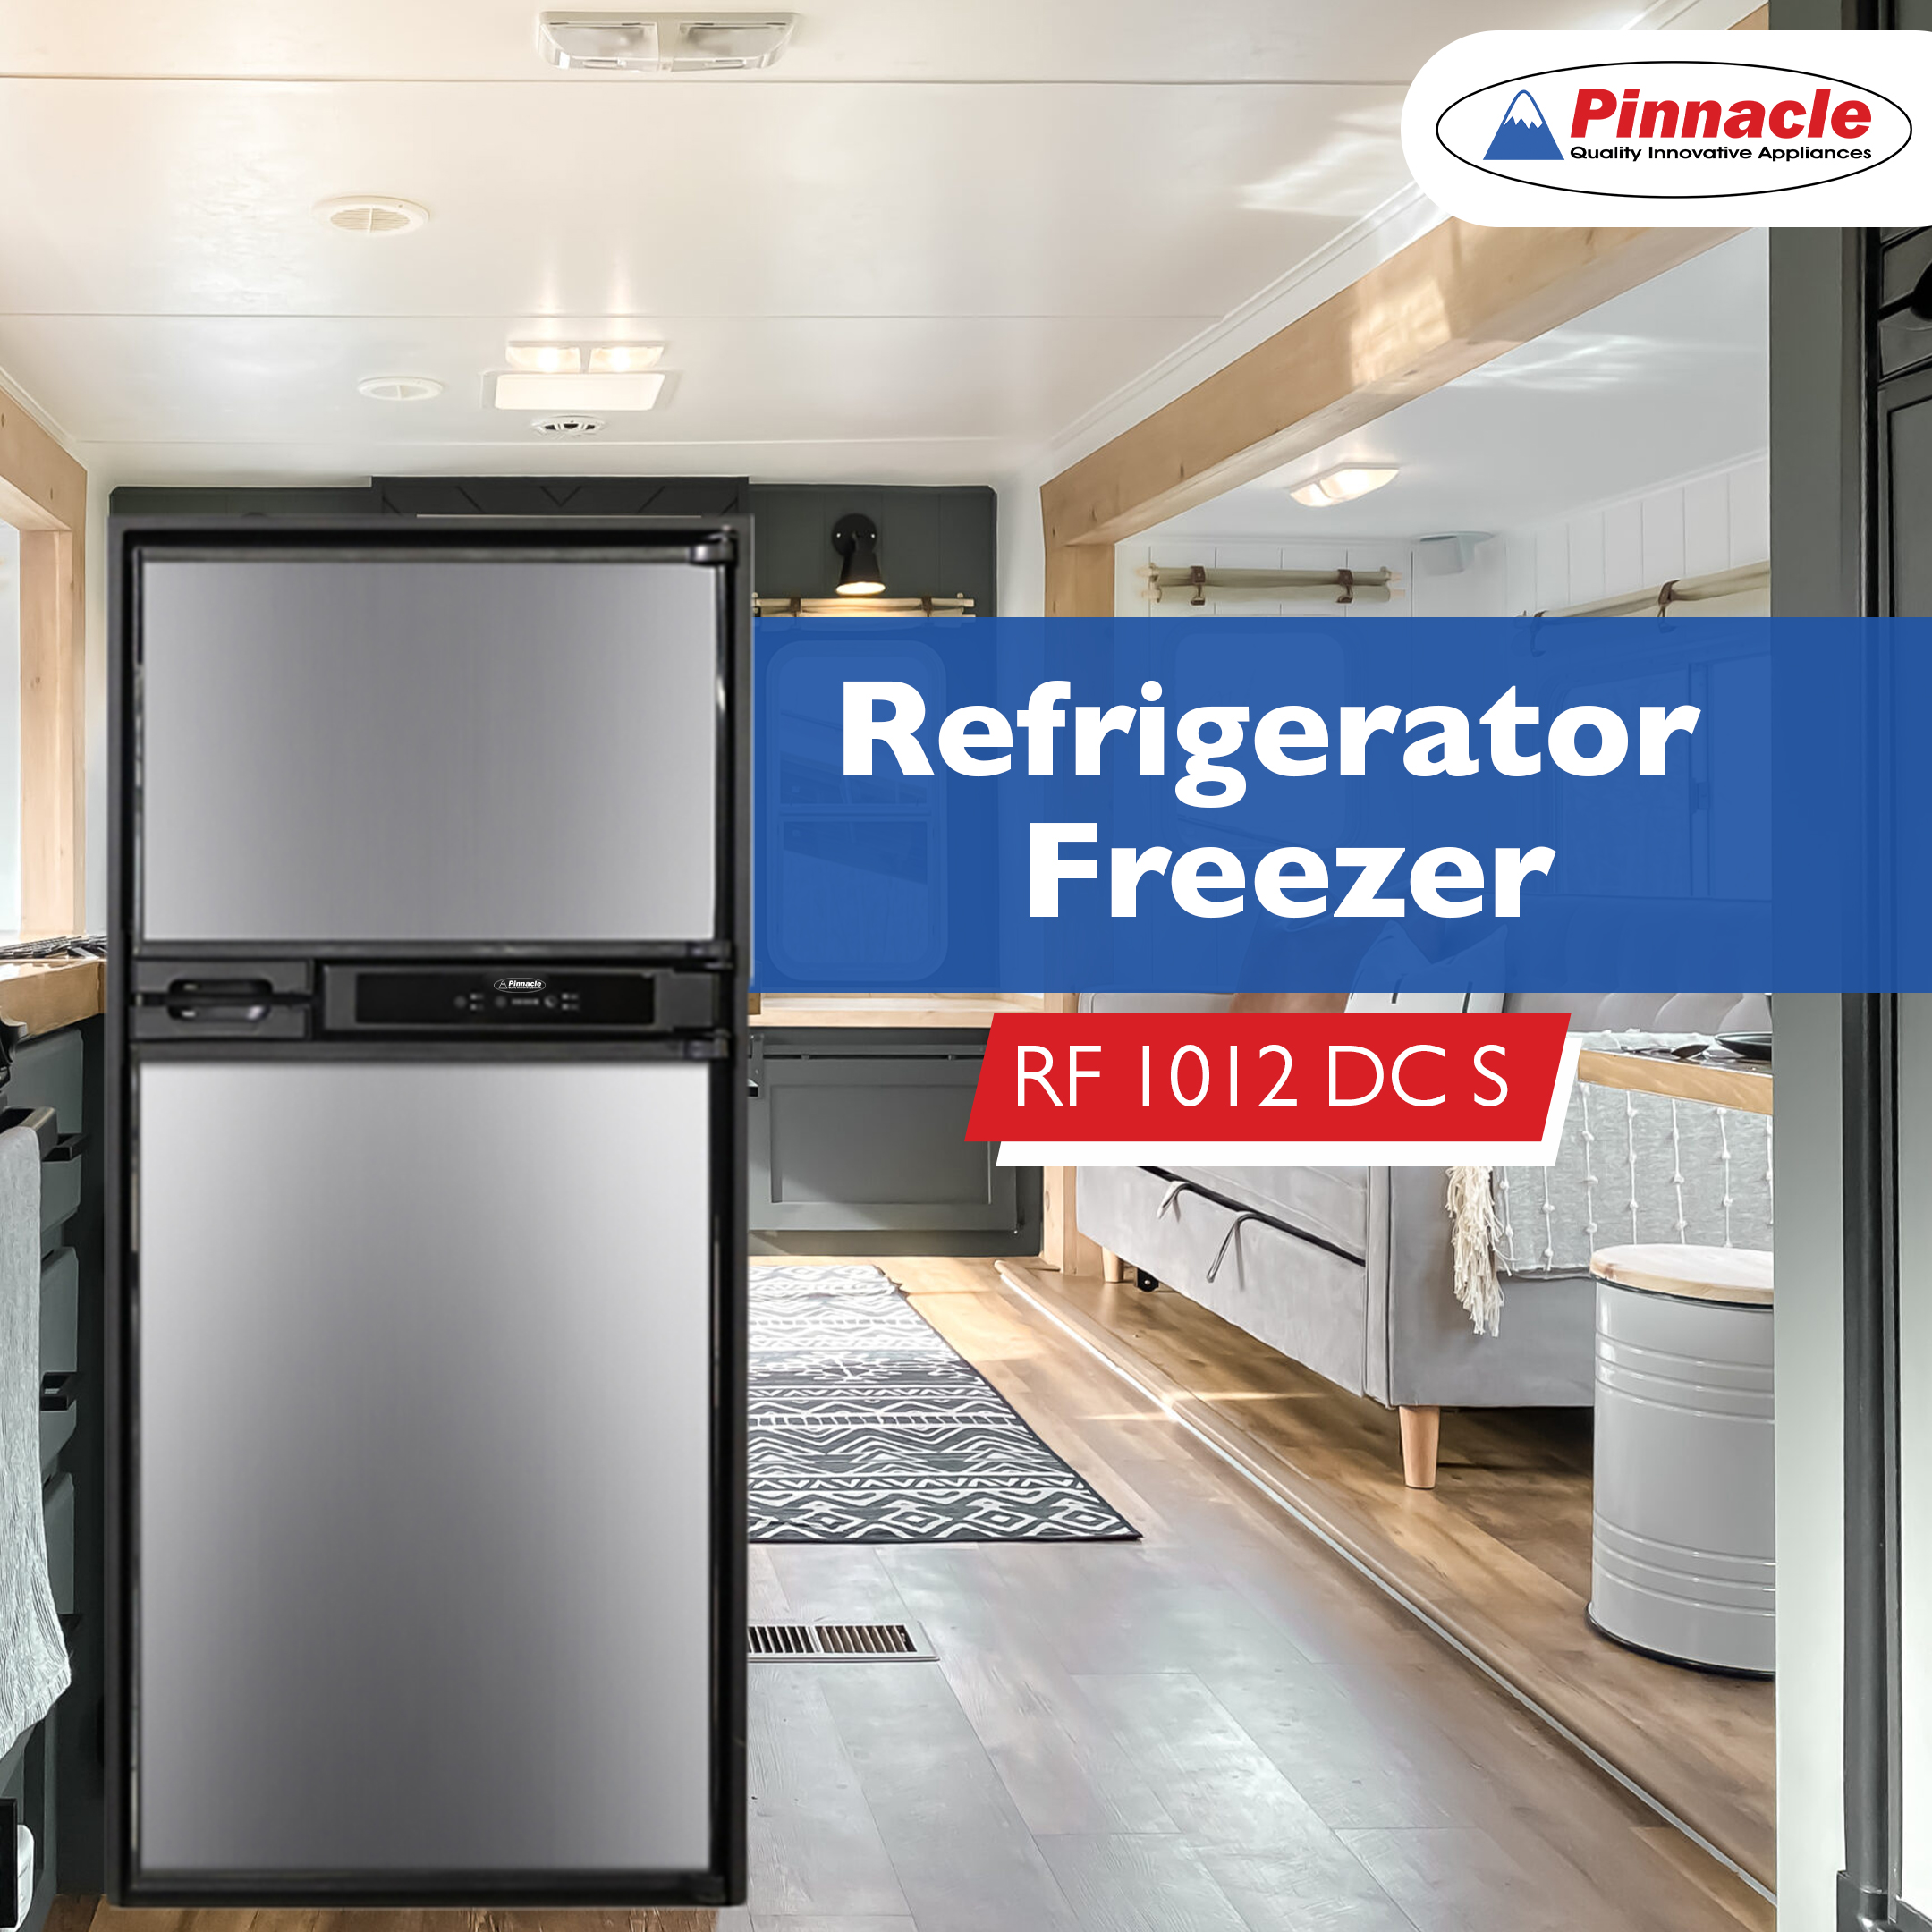 Pinnacle Combos Now Carries the Ultimate RV/Off-Grid Refrigerator-Freezer